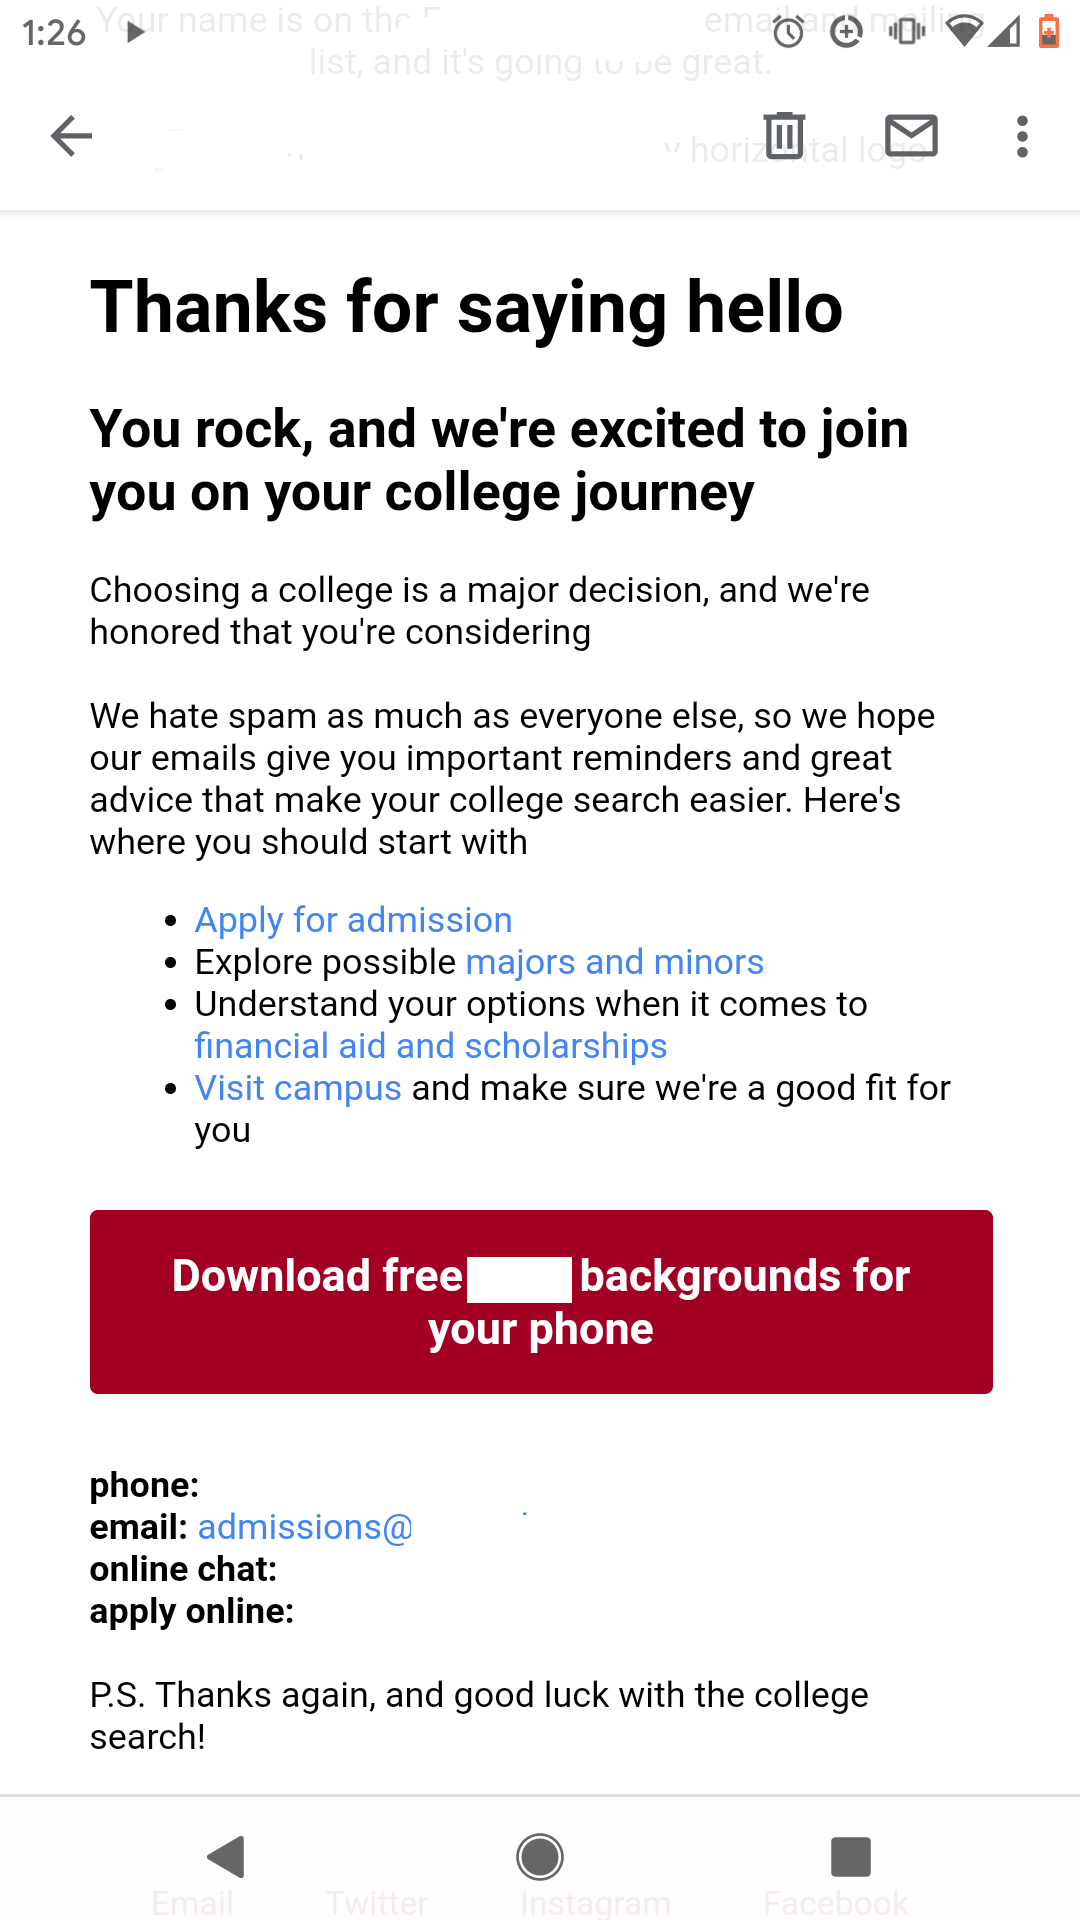 Image of an autoresponse from a college with links to application, majors, and downloads for phone backgrounds.